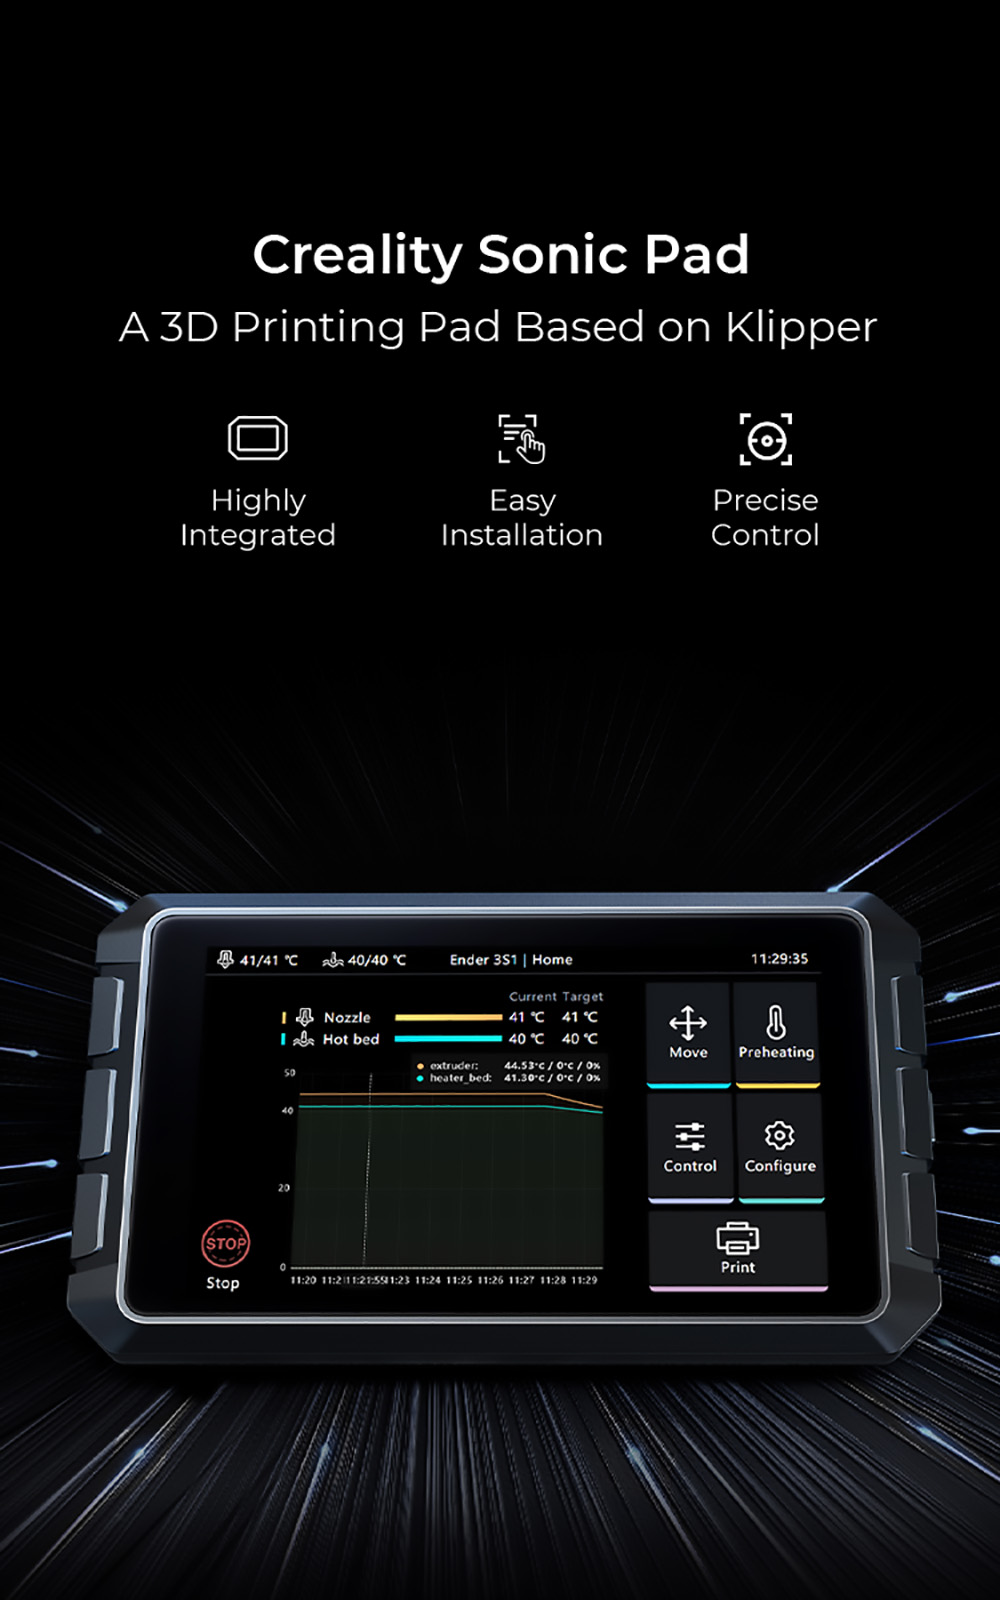 Creality Sonic Pad, Open Source 3D Printing Pad Based on Klipper, 7-inch Precise Control Screen, 1024x600 Resolution, 64-bit Mainboard - Black